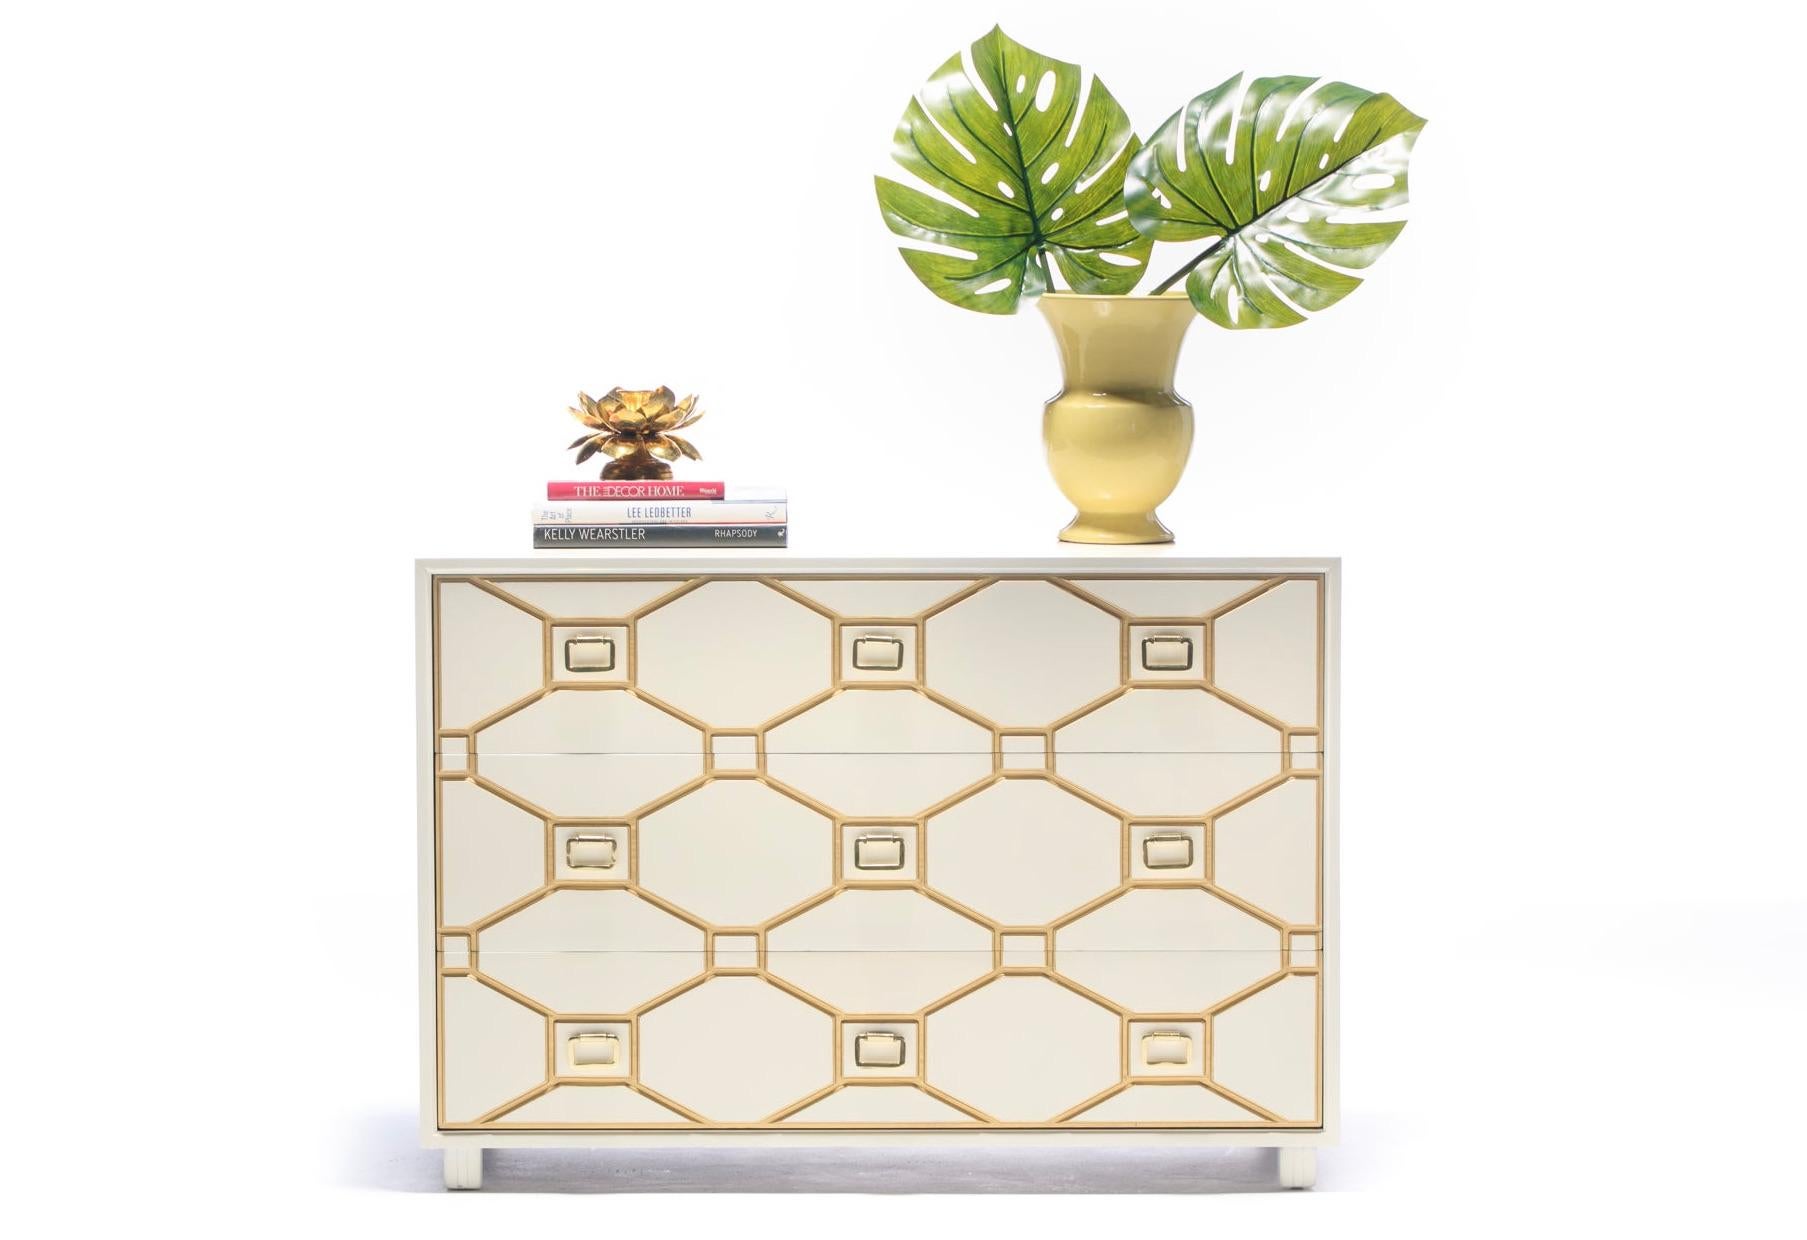 Hollywood glamour then and now, this Viennese Collection chest of drawers was designed by the Queen of Hollywood Regency - Dorothy Draper - in the early 1960s and features solid brass rectangular pulls centered amidst incised rectangles set in an